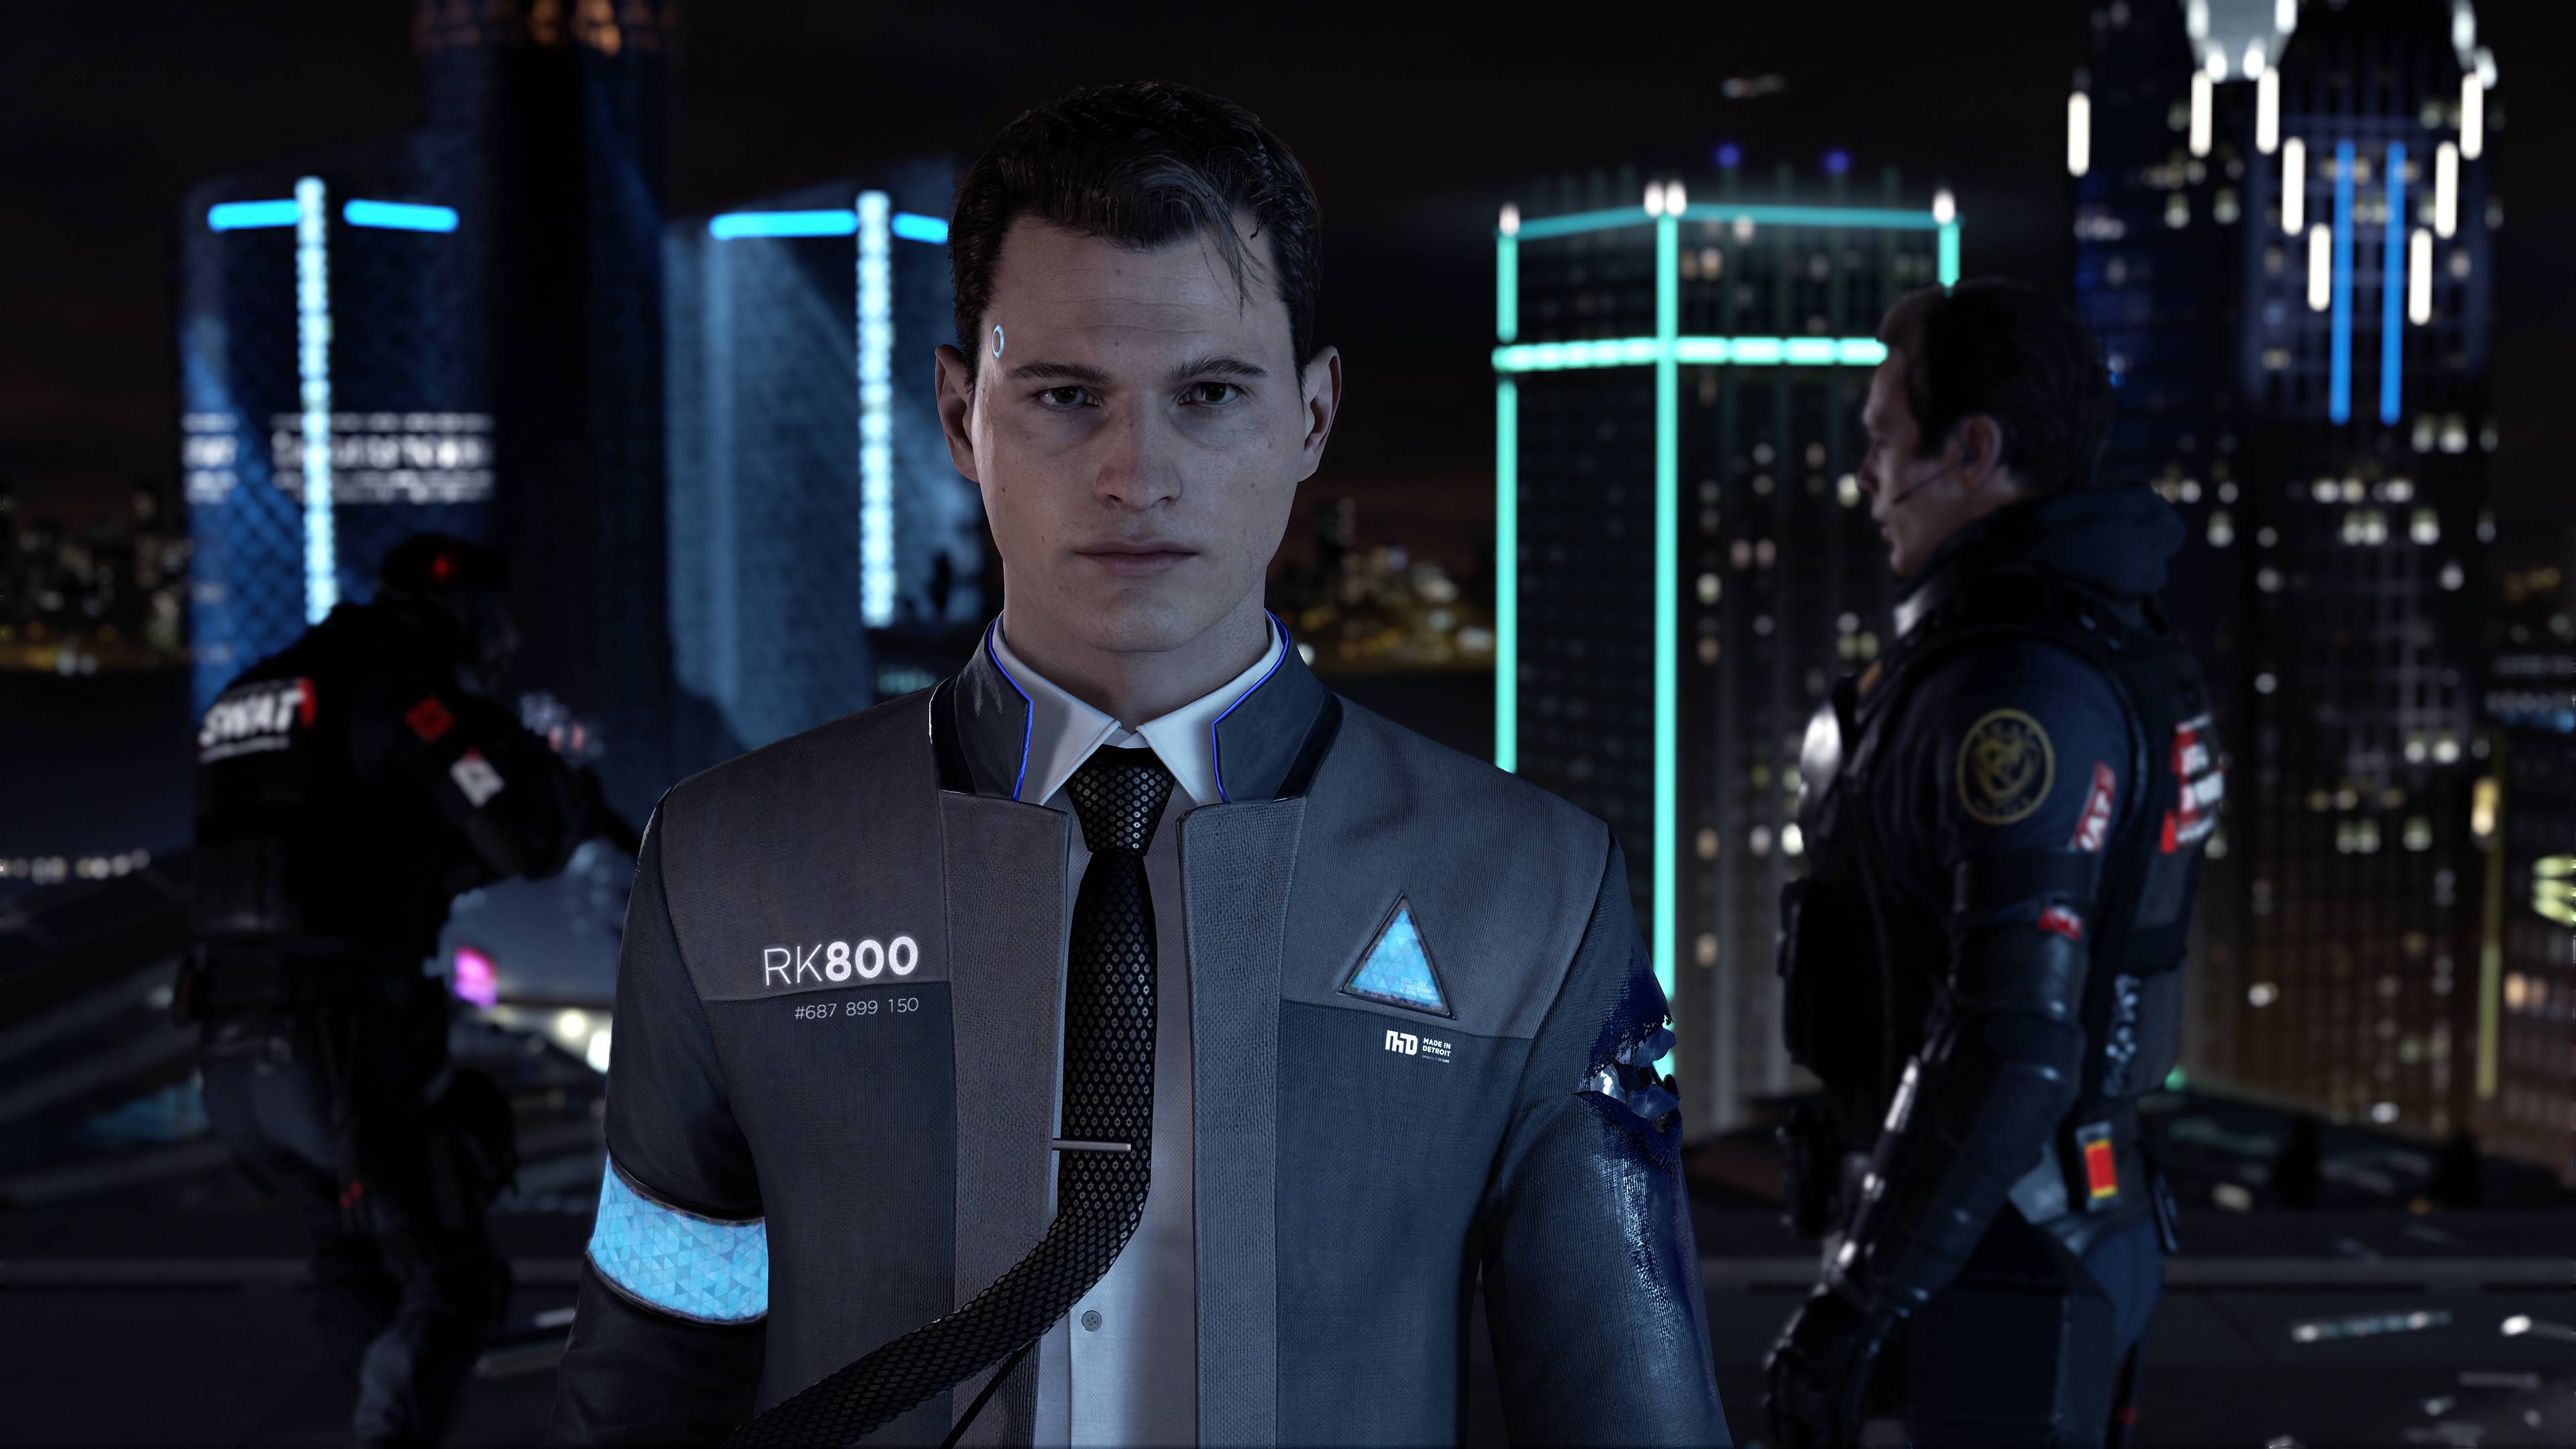 Detroit: Become Human Review  Relevant, thought provoking, and fantastic